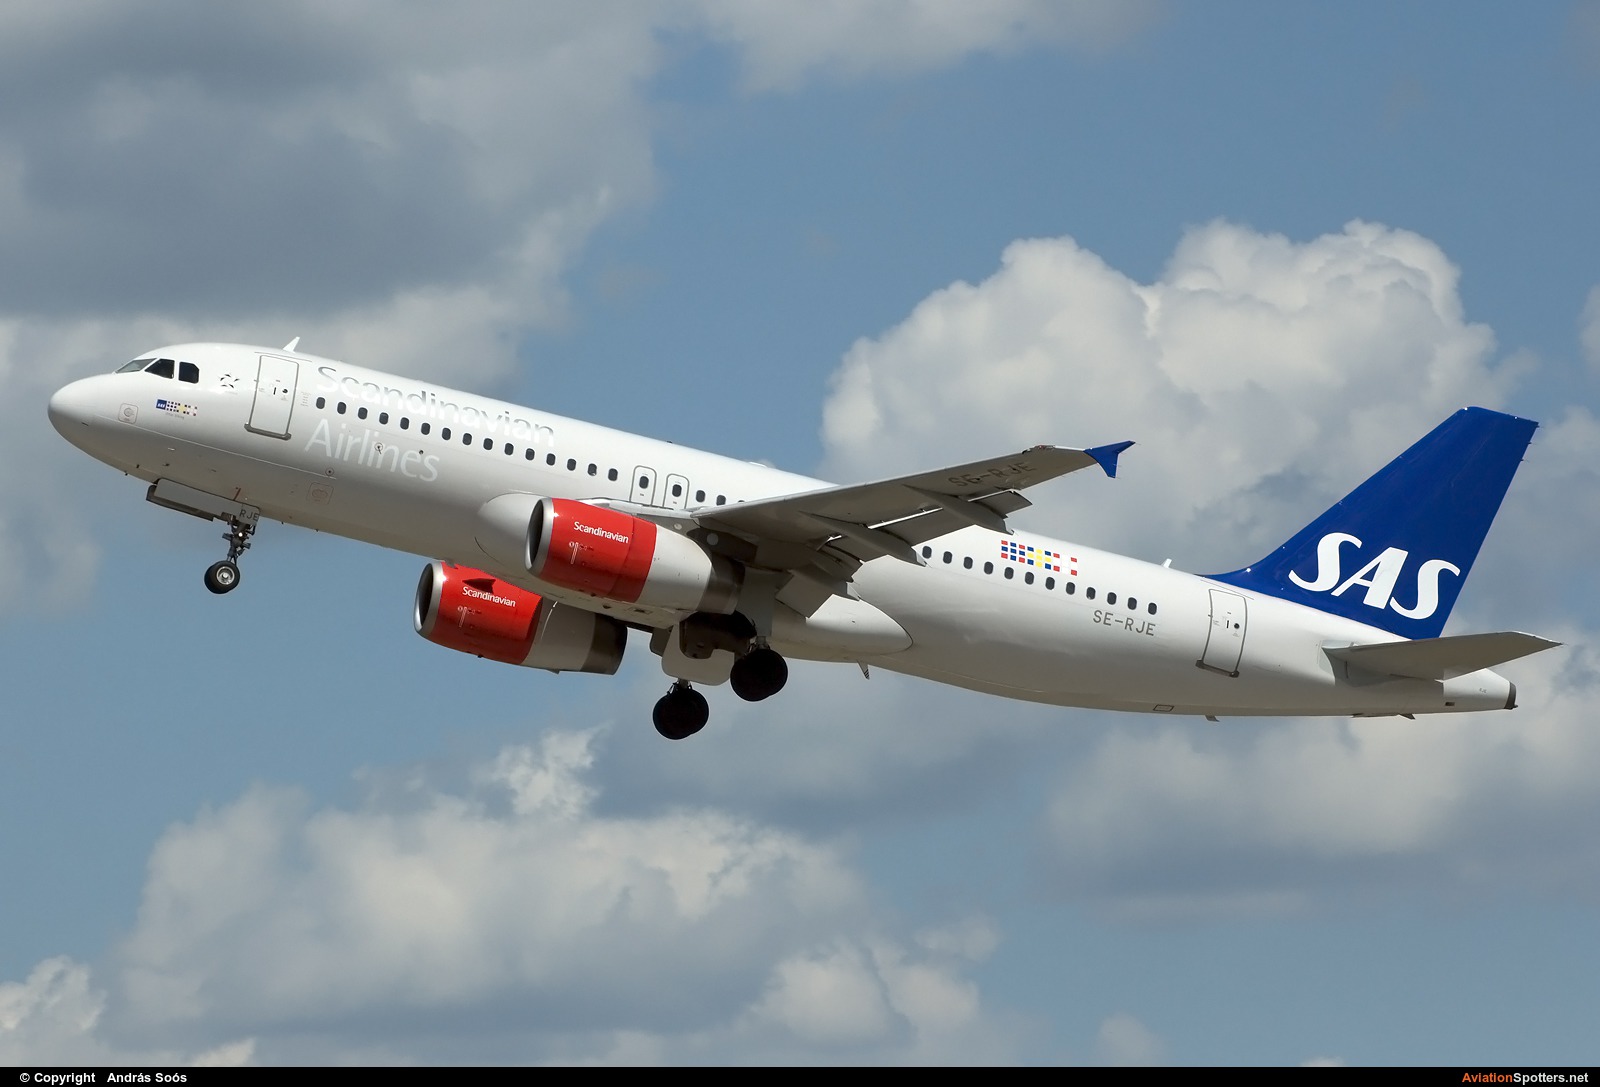 SAS - Scandinavian Airlines  -  A320-232  (SE-RJE) By András Soós (sas1965)